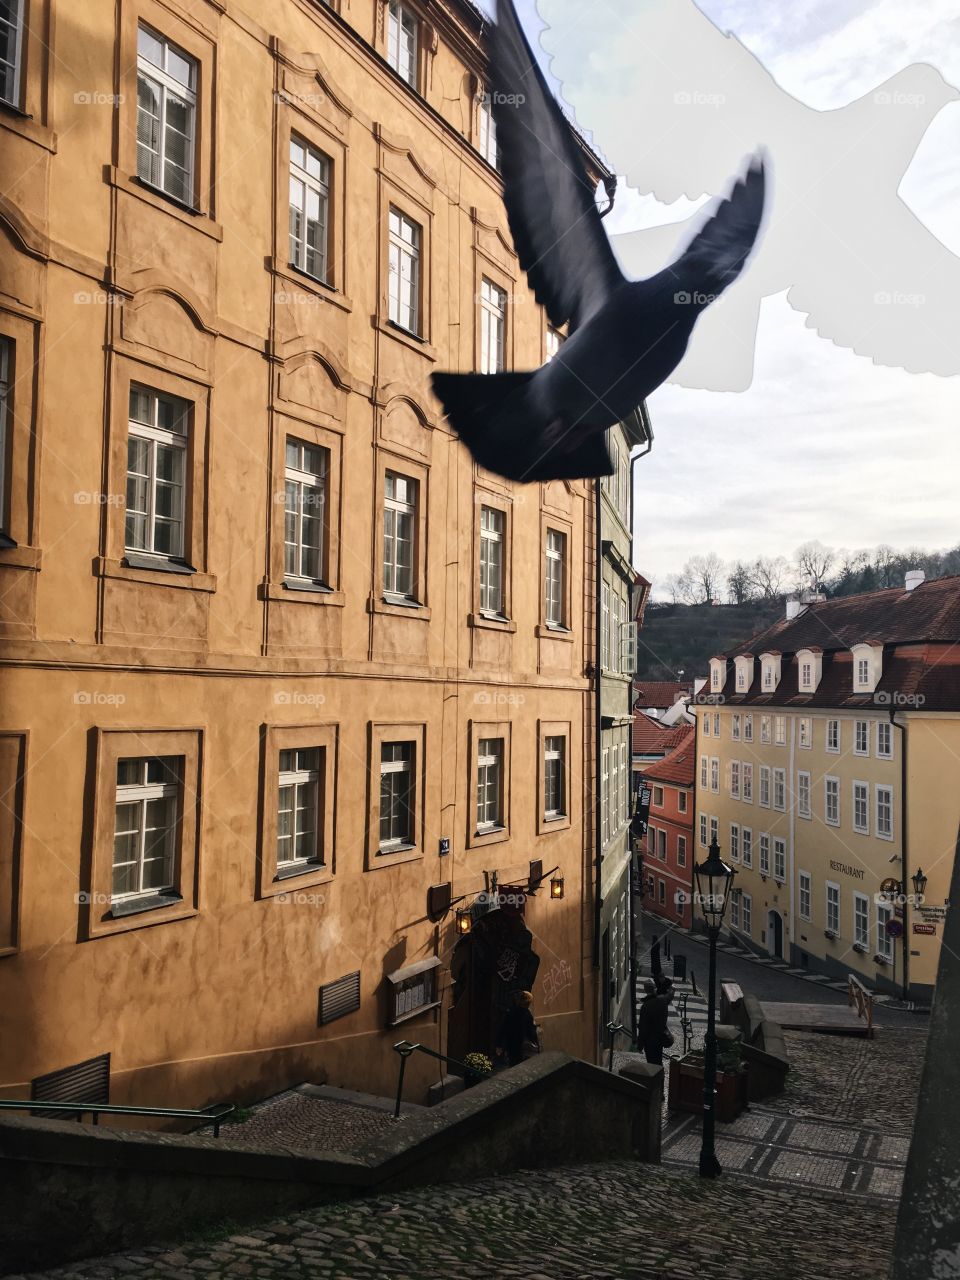 Flying above the streets of Prague.